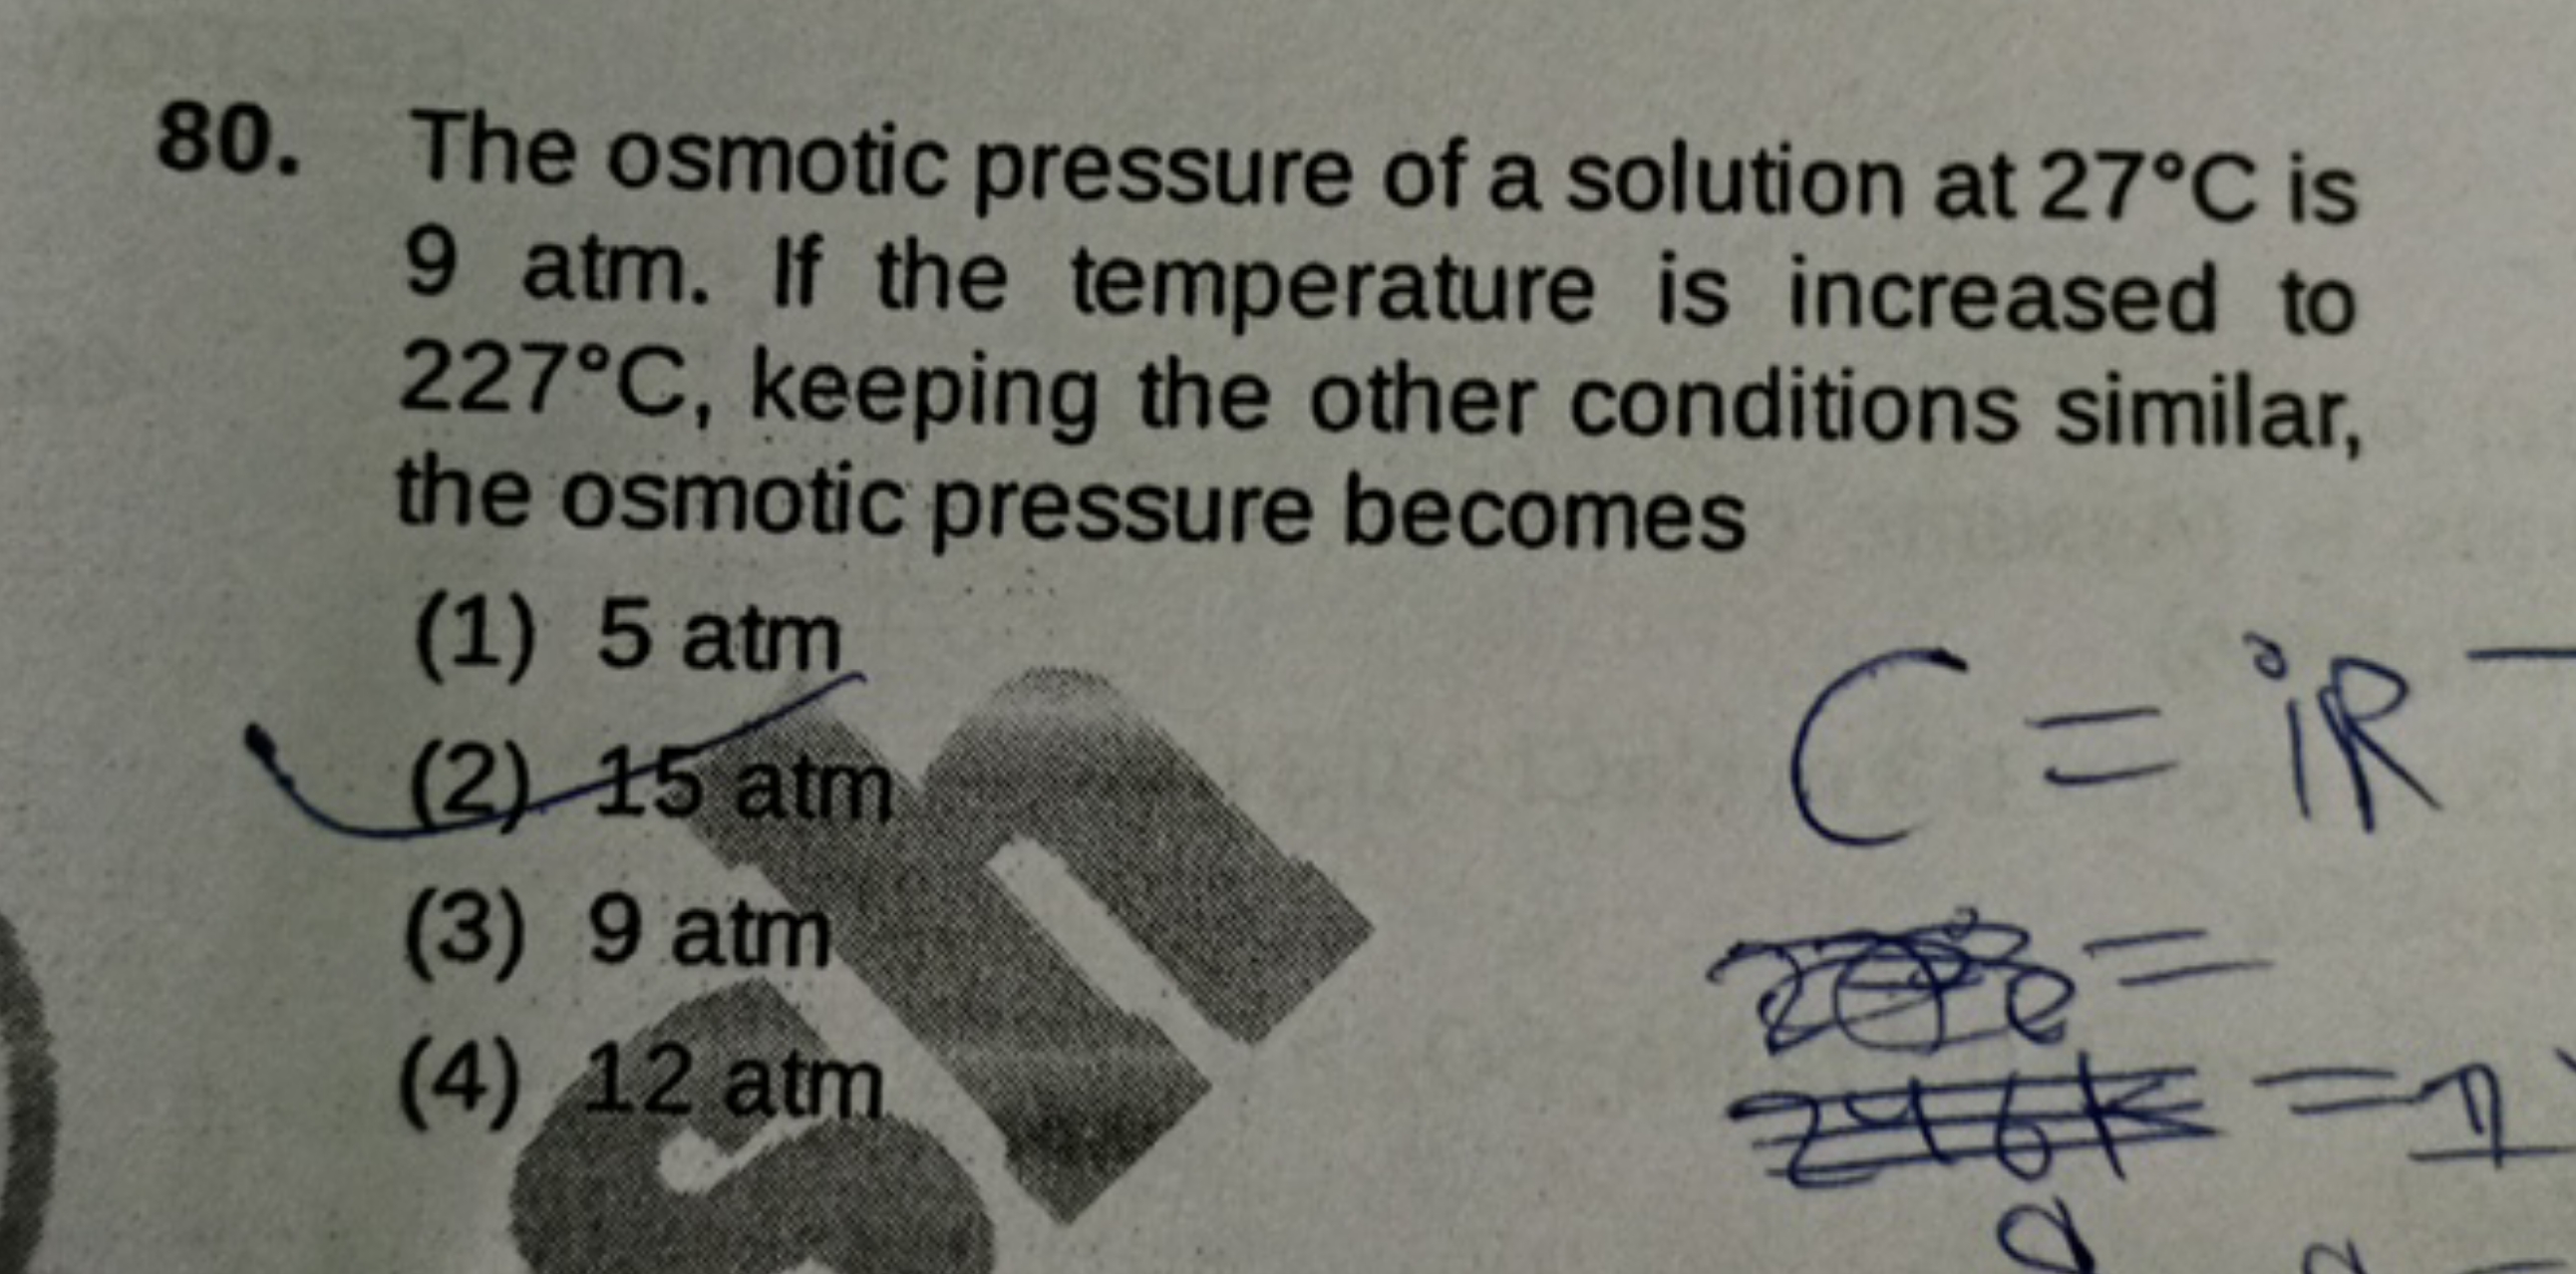 The osmotic pressure of a solution at 27∘C is 9 atm. If the temperatur